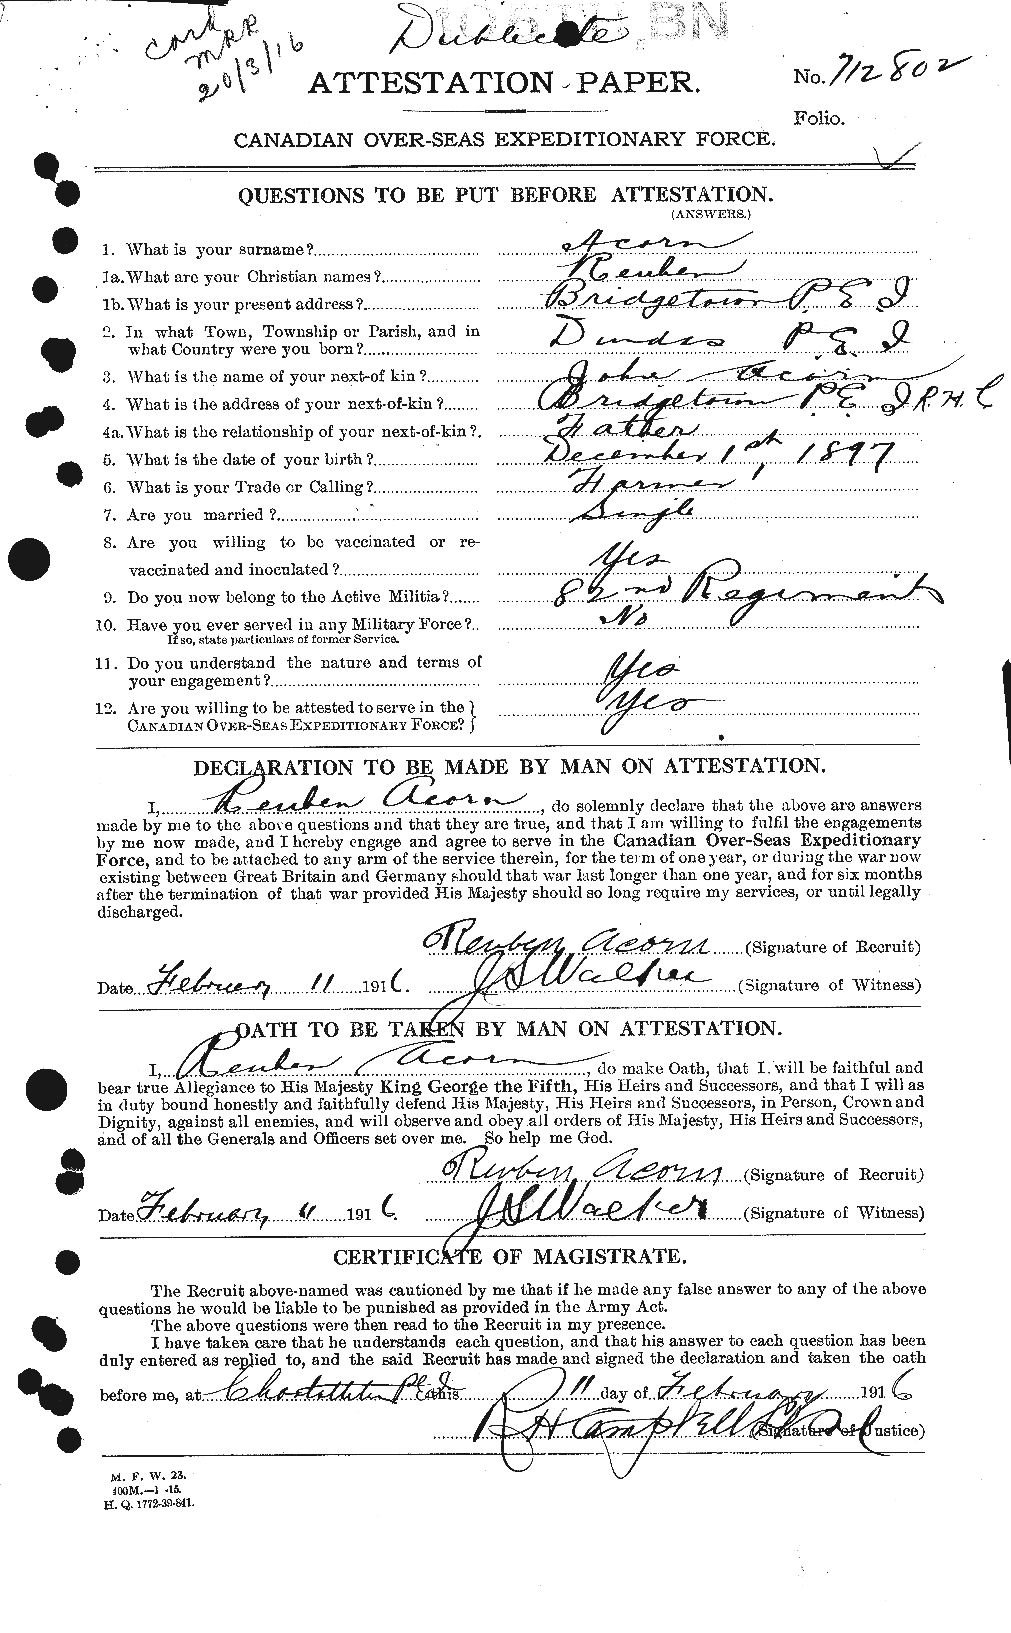 Personnel Records of the First World War - CEF 200853a